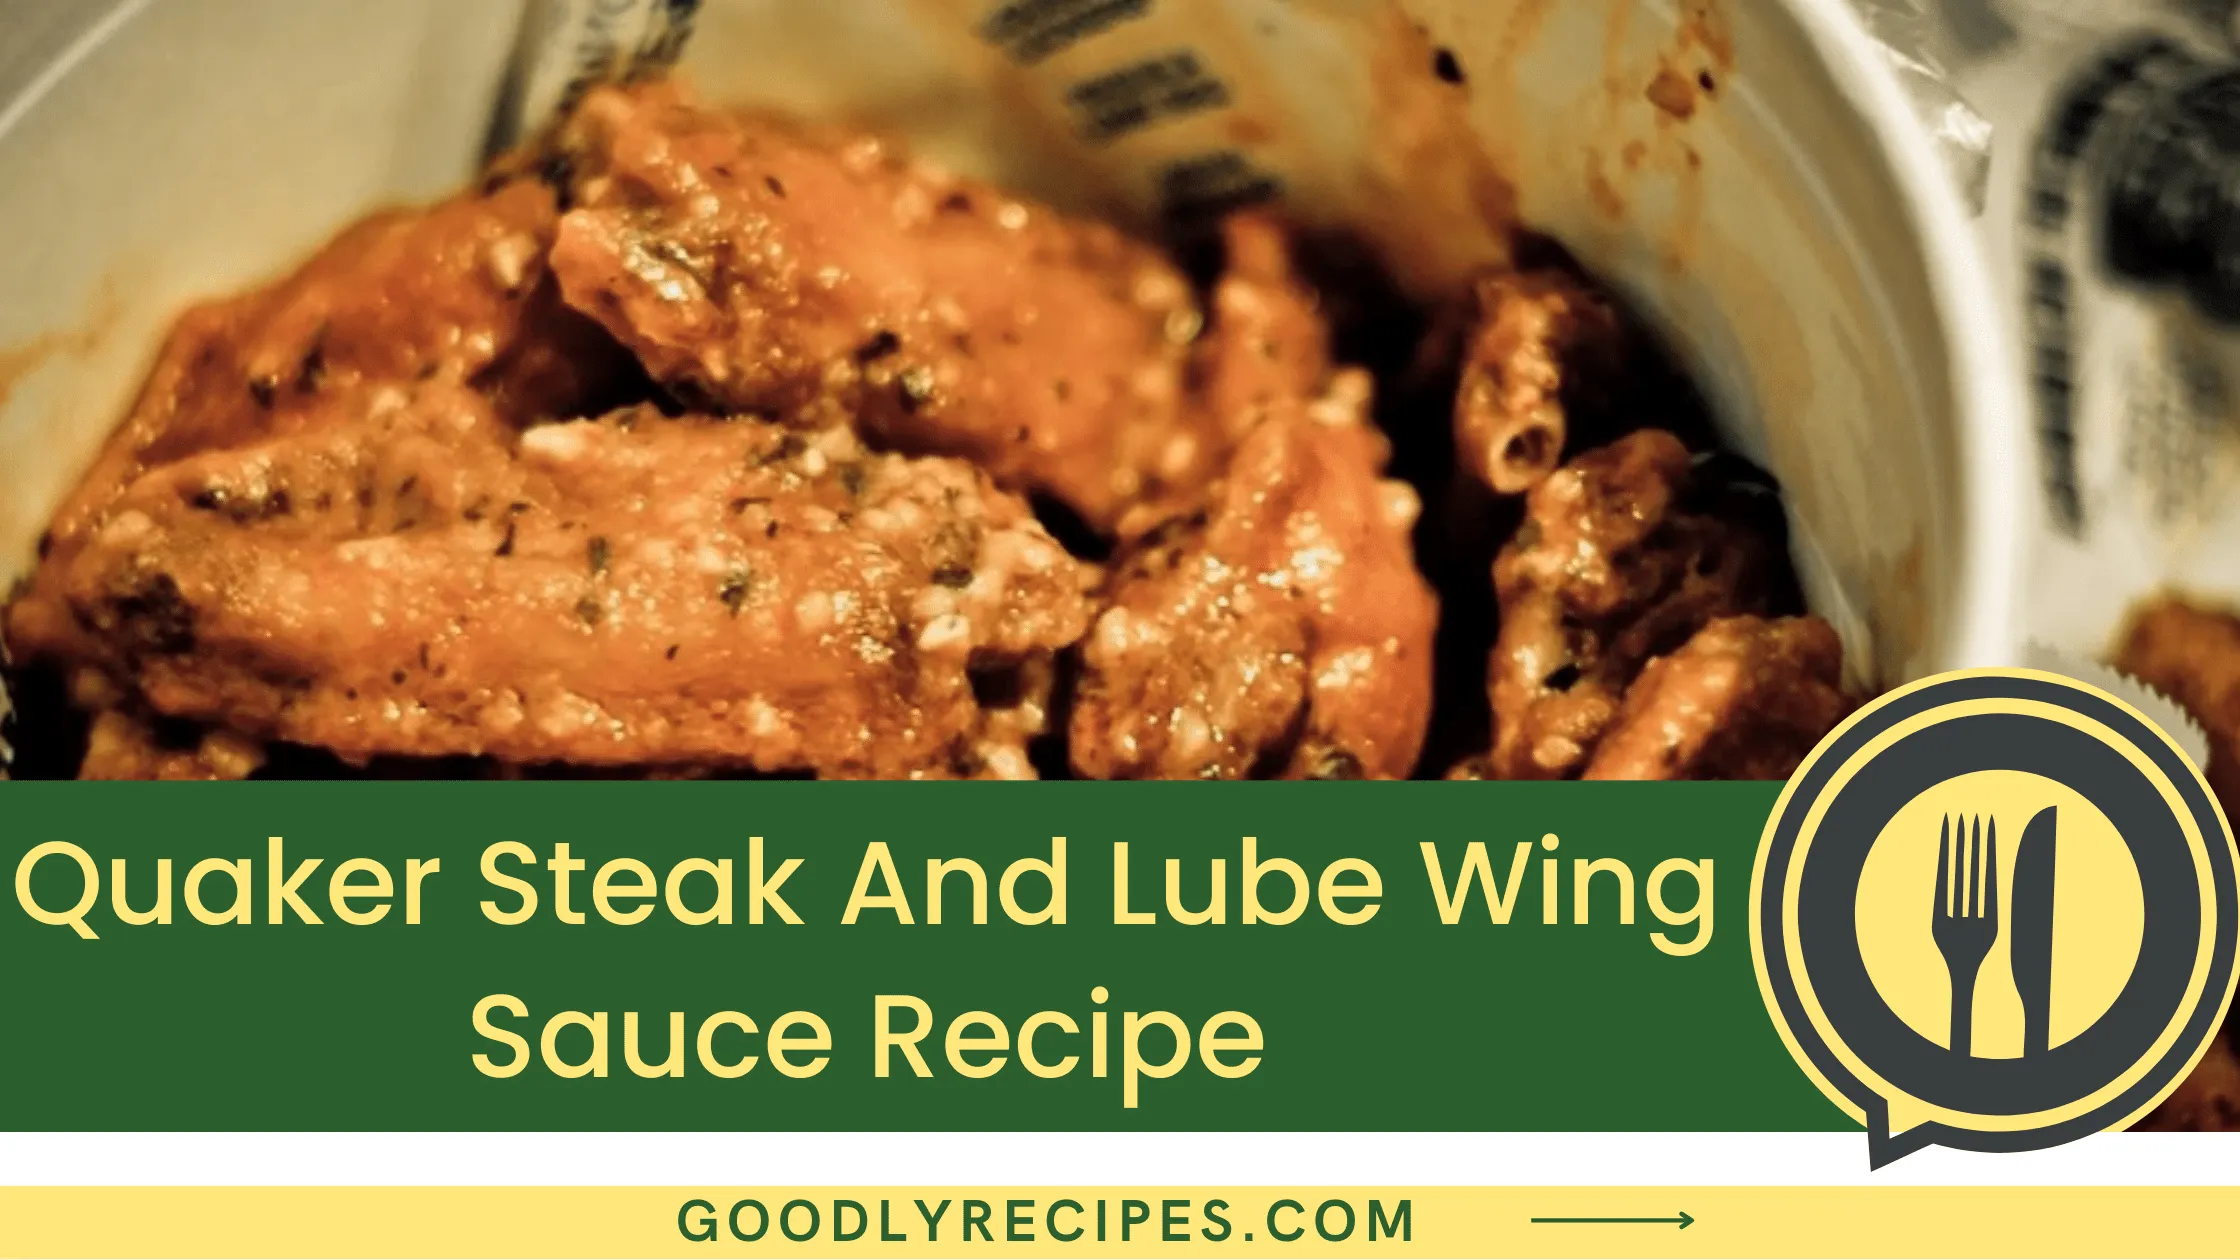 What Is Quaker Steak and Lube Wing Sauce?